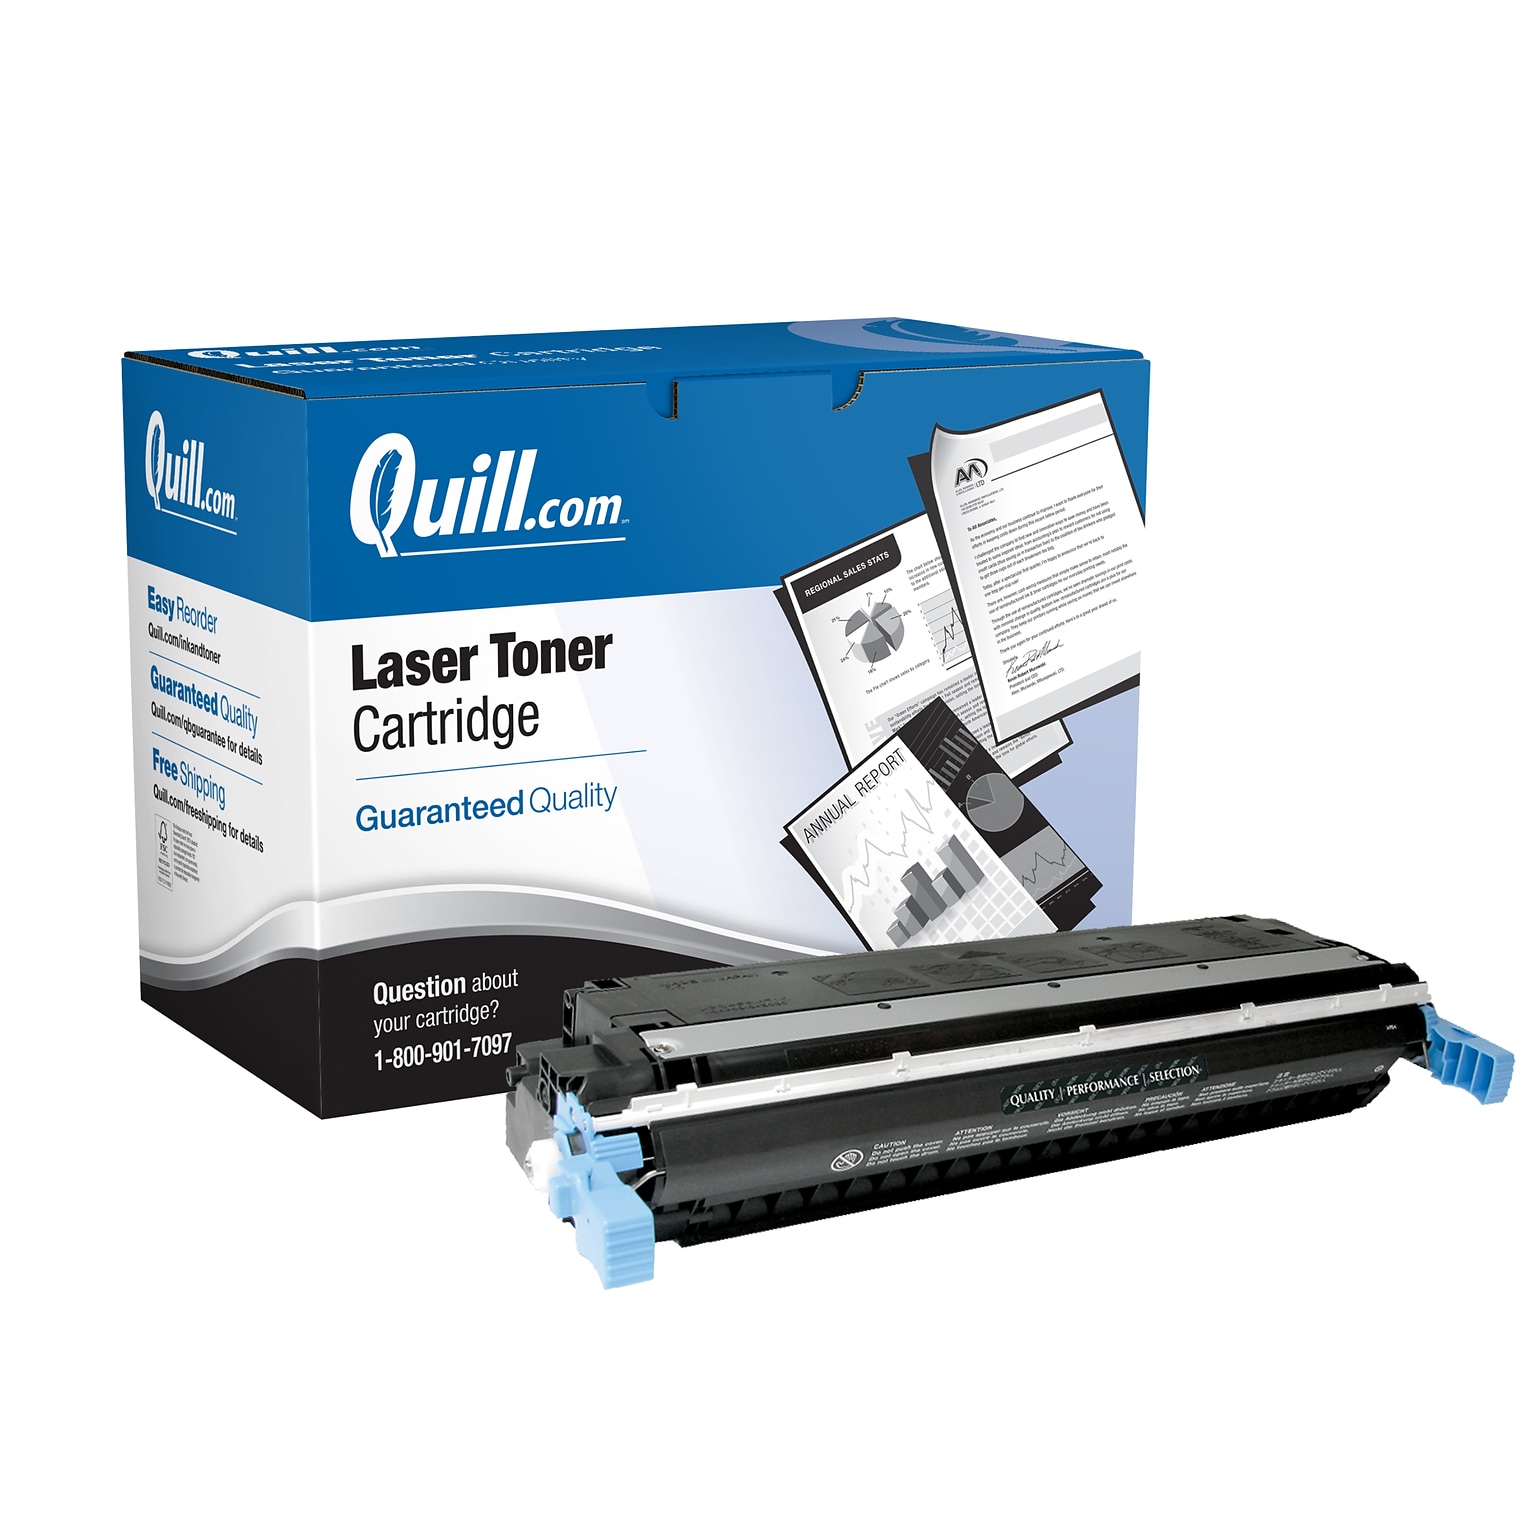 Quill Brand® Remanufactured Black Standard Yield Laser Toner Cartridge Replacement for HP 645A (C9730A) (Lifetime Warranty)